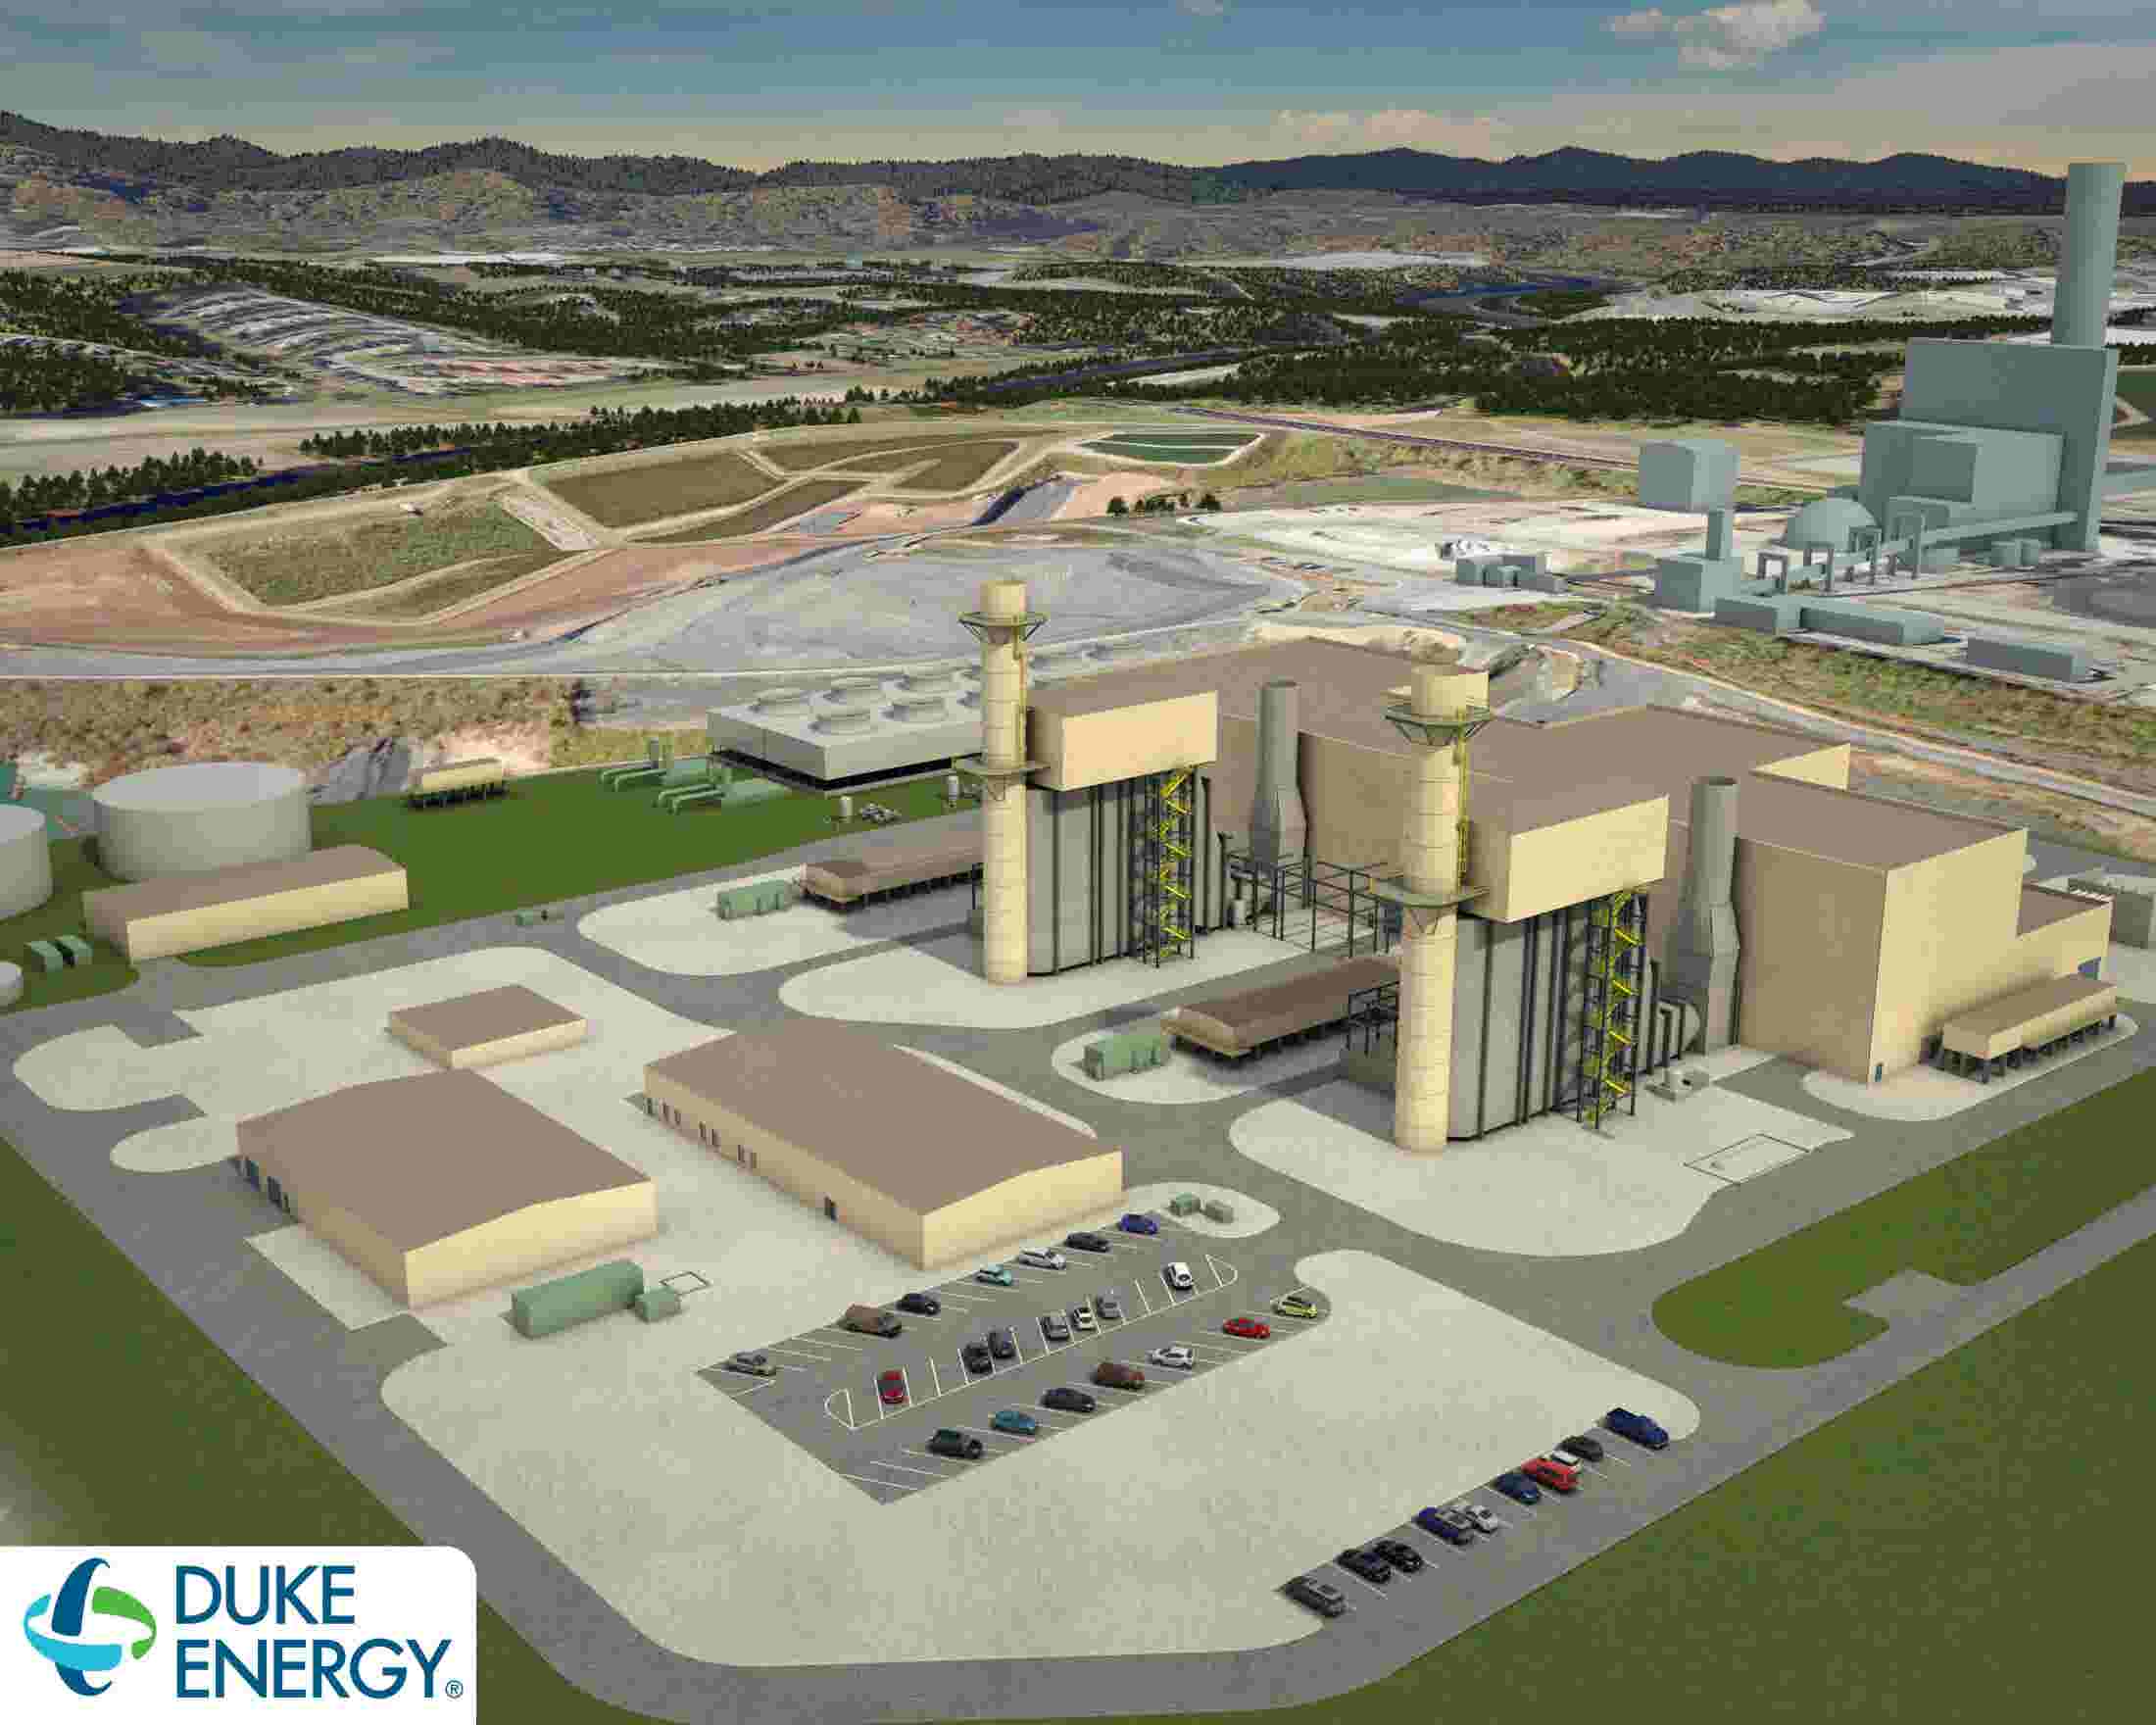 duke-energy-s-new-893-million-natural-gas-plant-to-open-in-late-2019